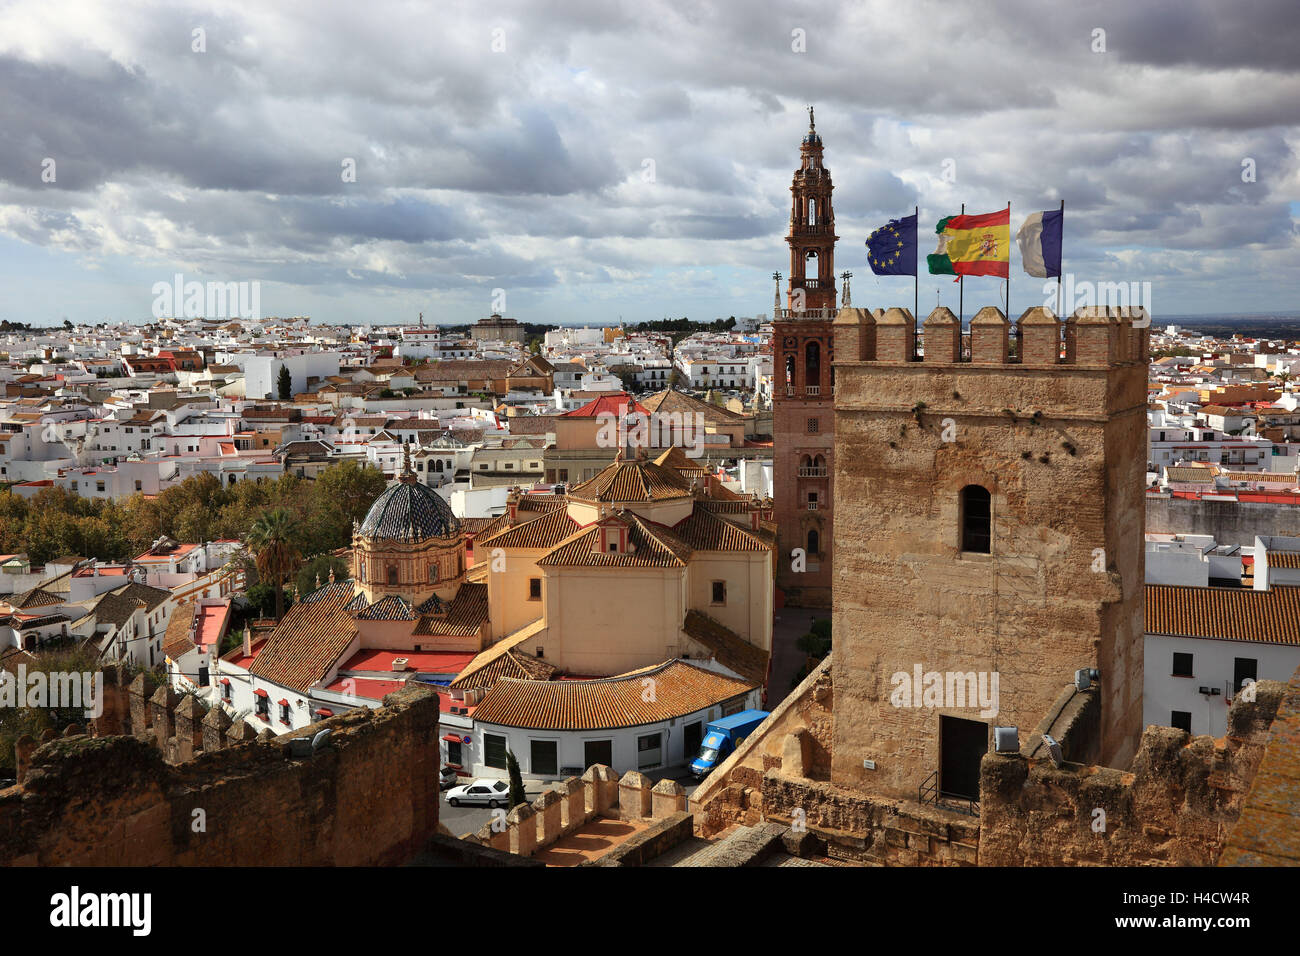 Spain, Andalusia, town Carmona in the province Seville, view from the Alkazar de la Puerta de Seville on Torre del Oro, the cathedral San Pedro and the Old Town Stock Photo